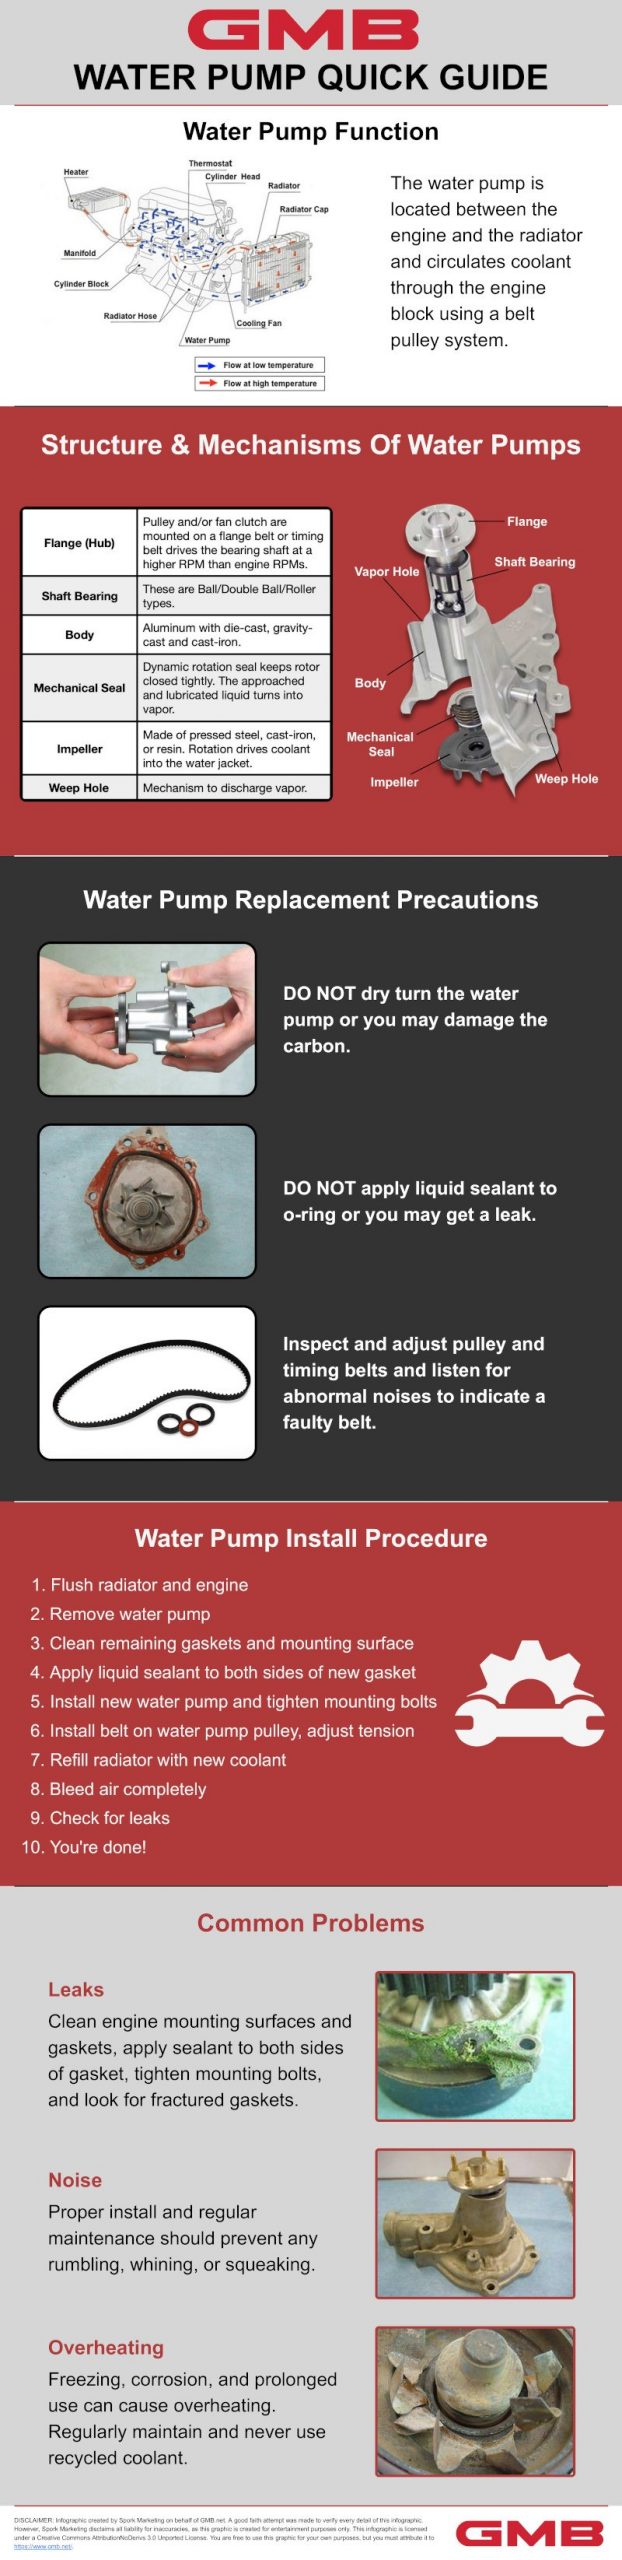 Water pump quick guide